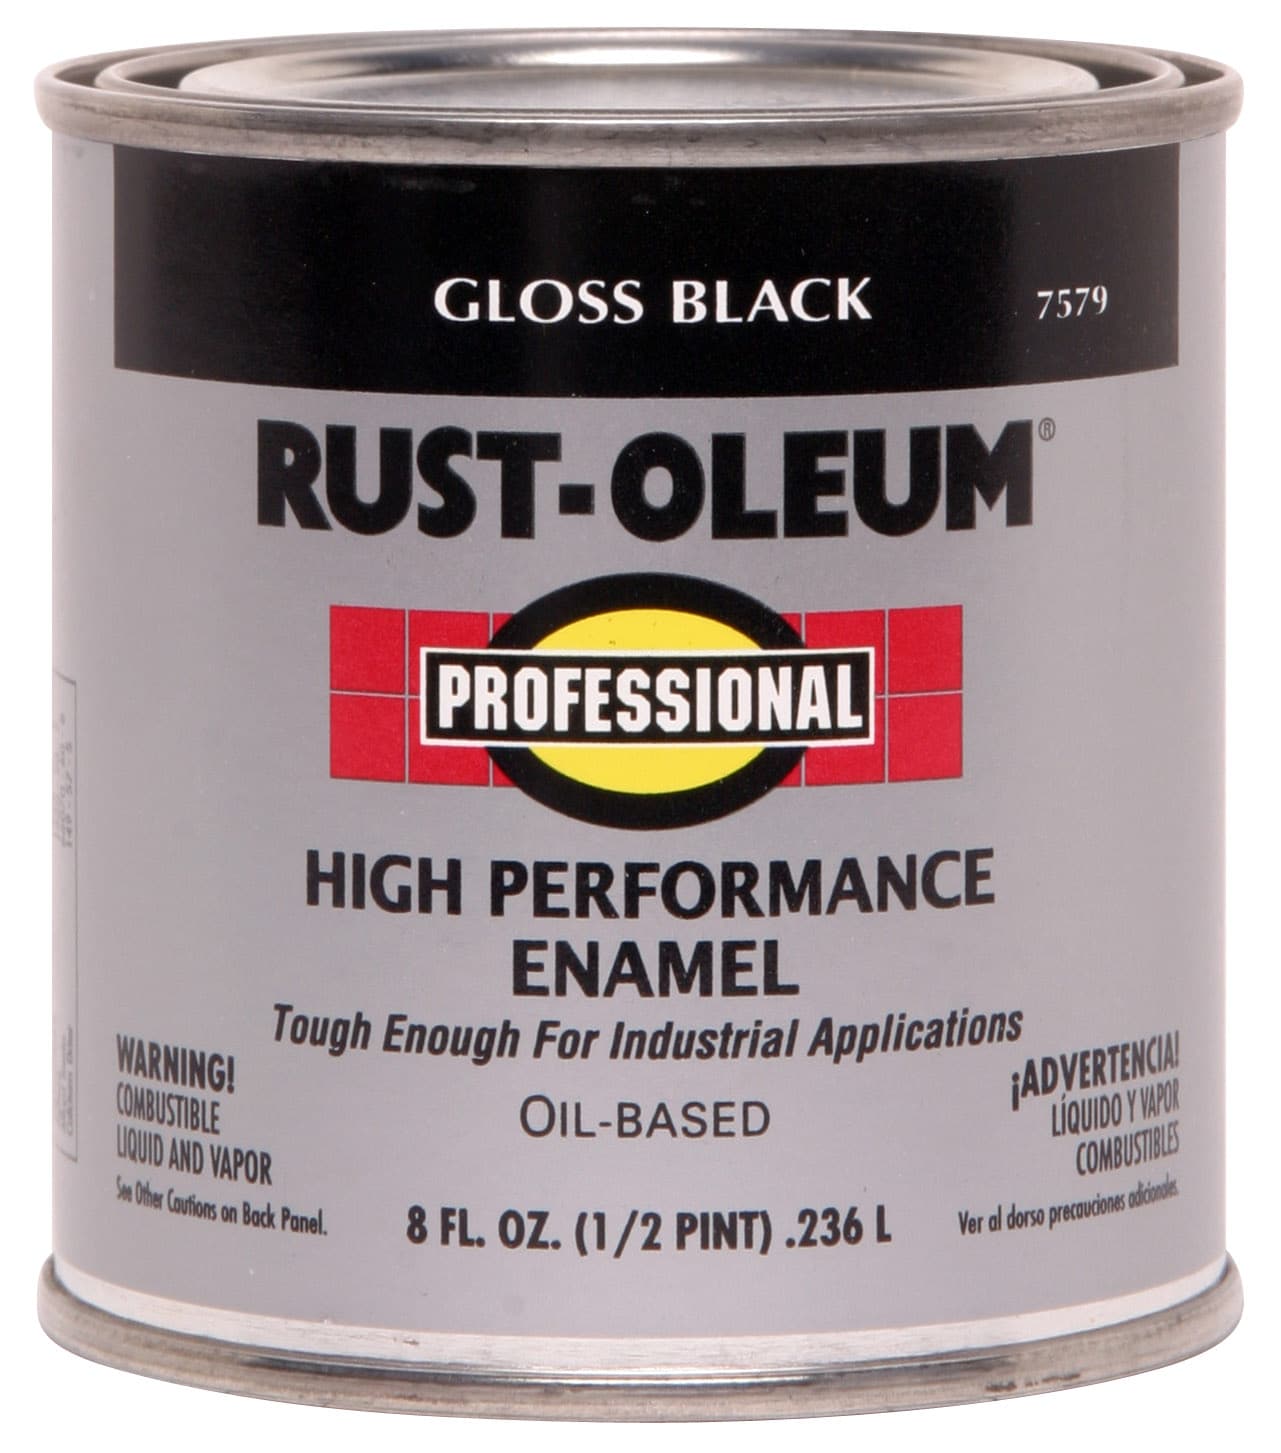 Semi-Gloss Black Primer - Well Worth Professional Car Care Products